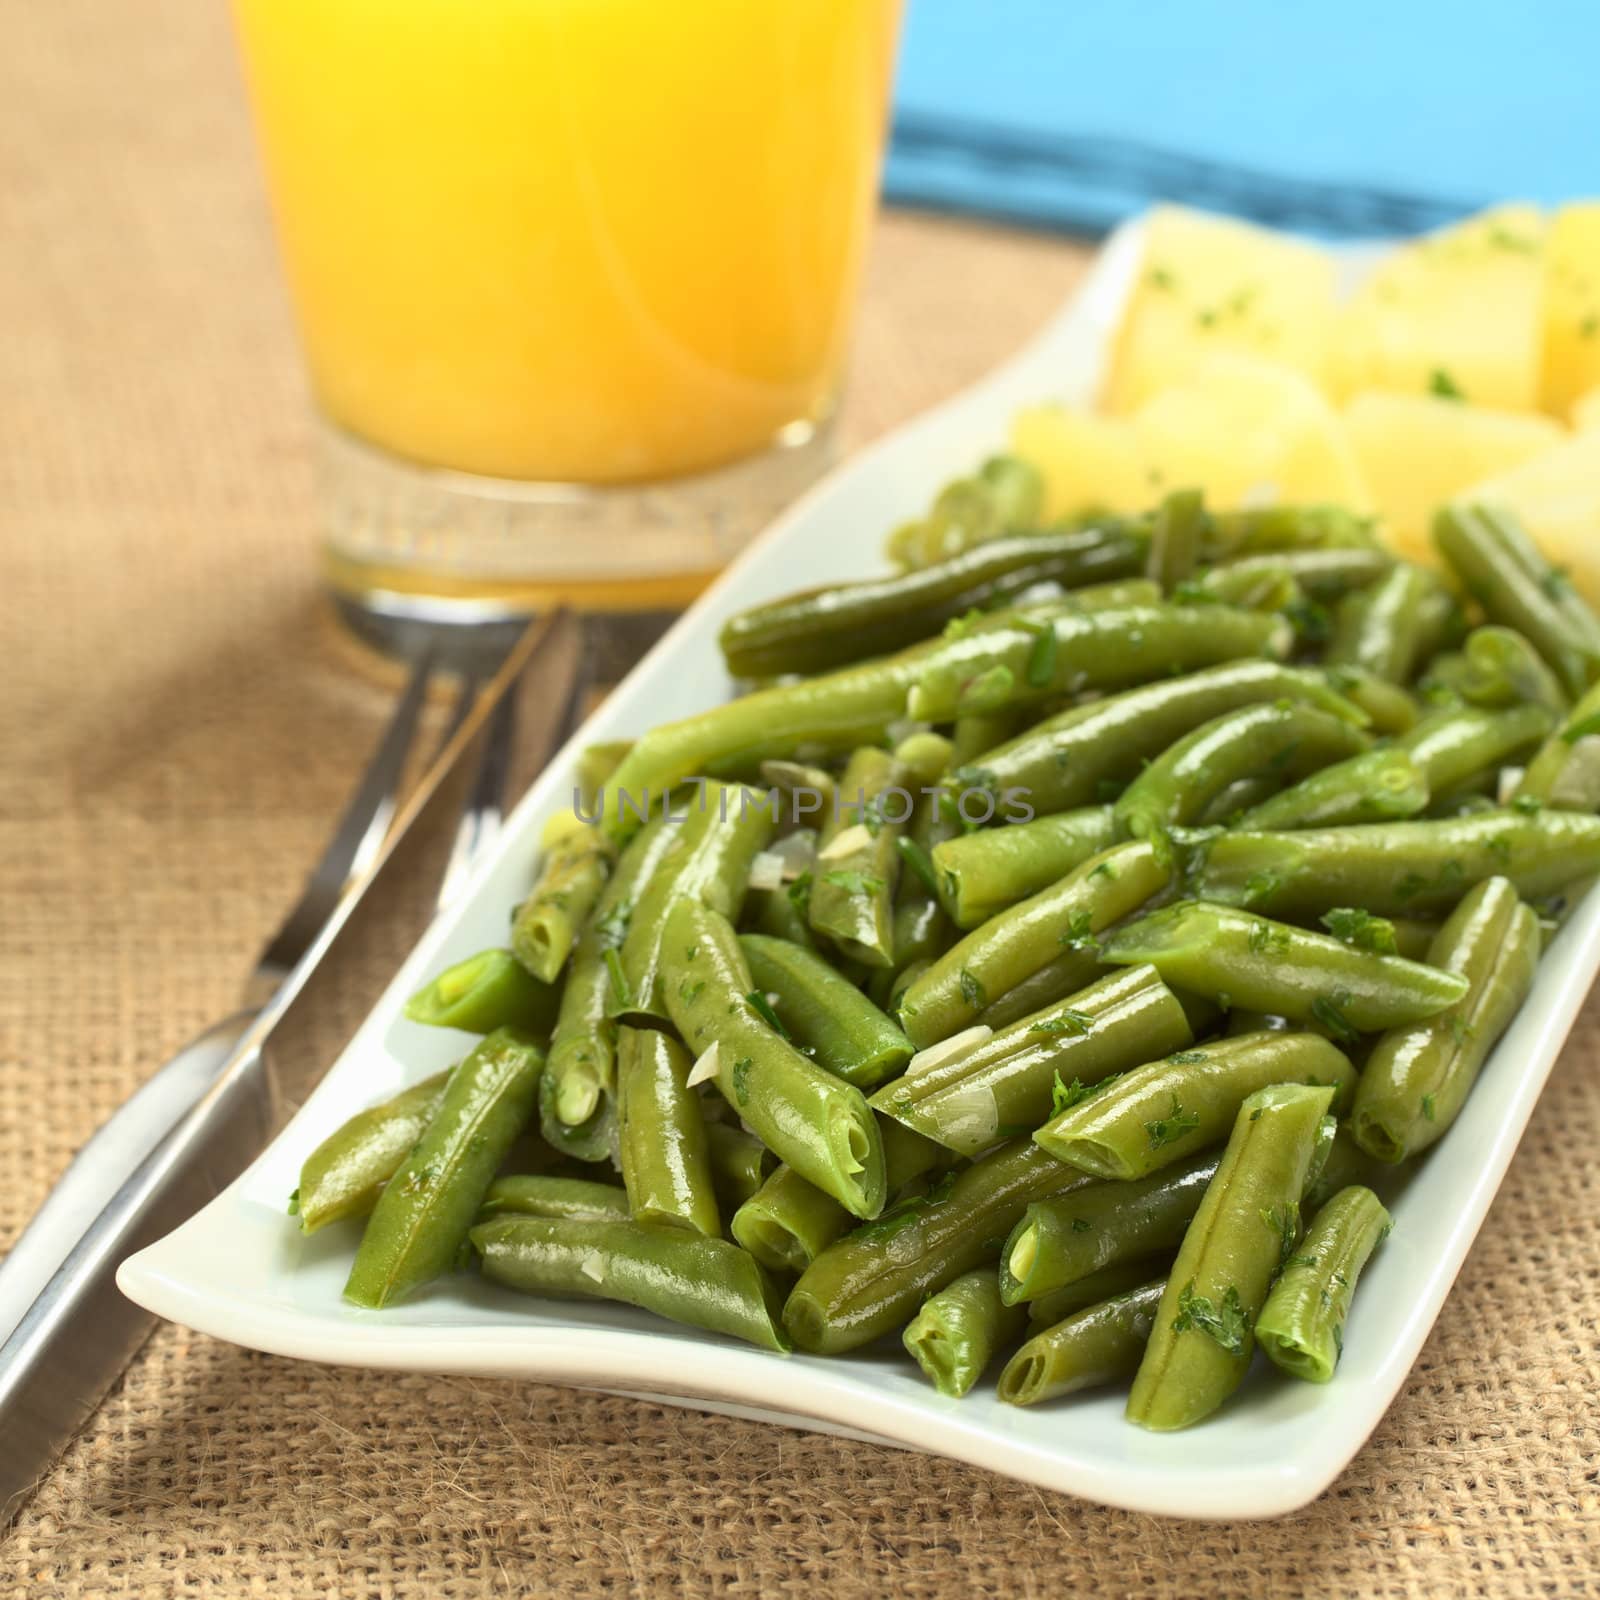 Cooked green beans with onion and parsley with cooked potato, orange juice and blue napkins in the back (Selective Focus, Focus on one third of the picture)